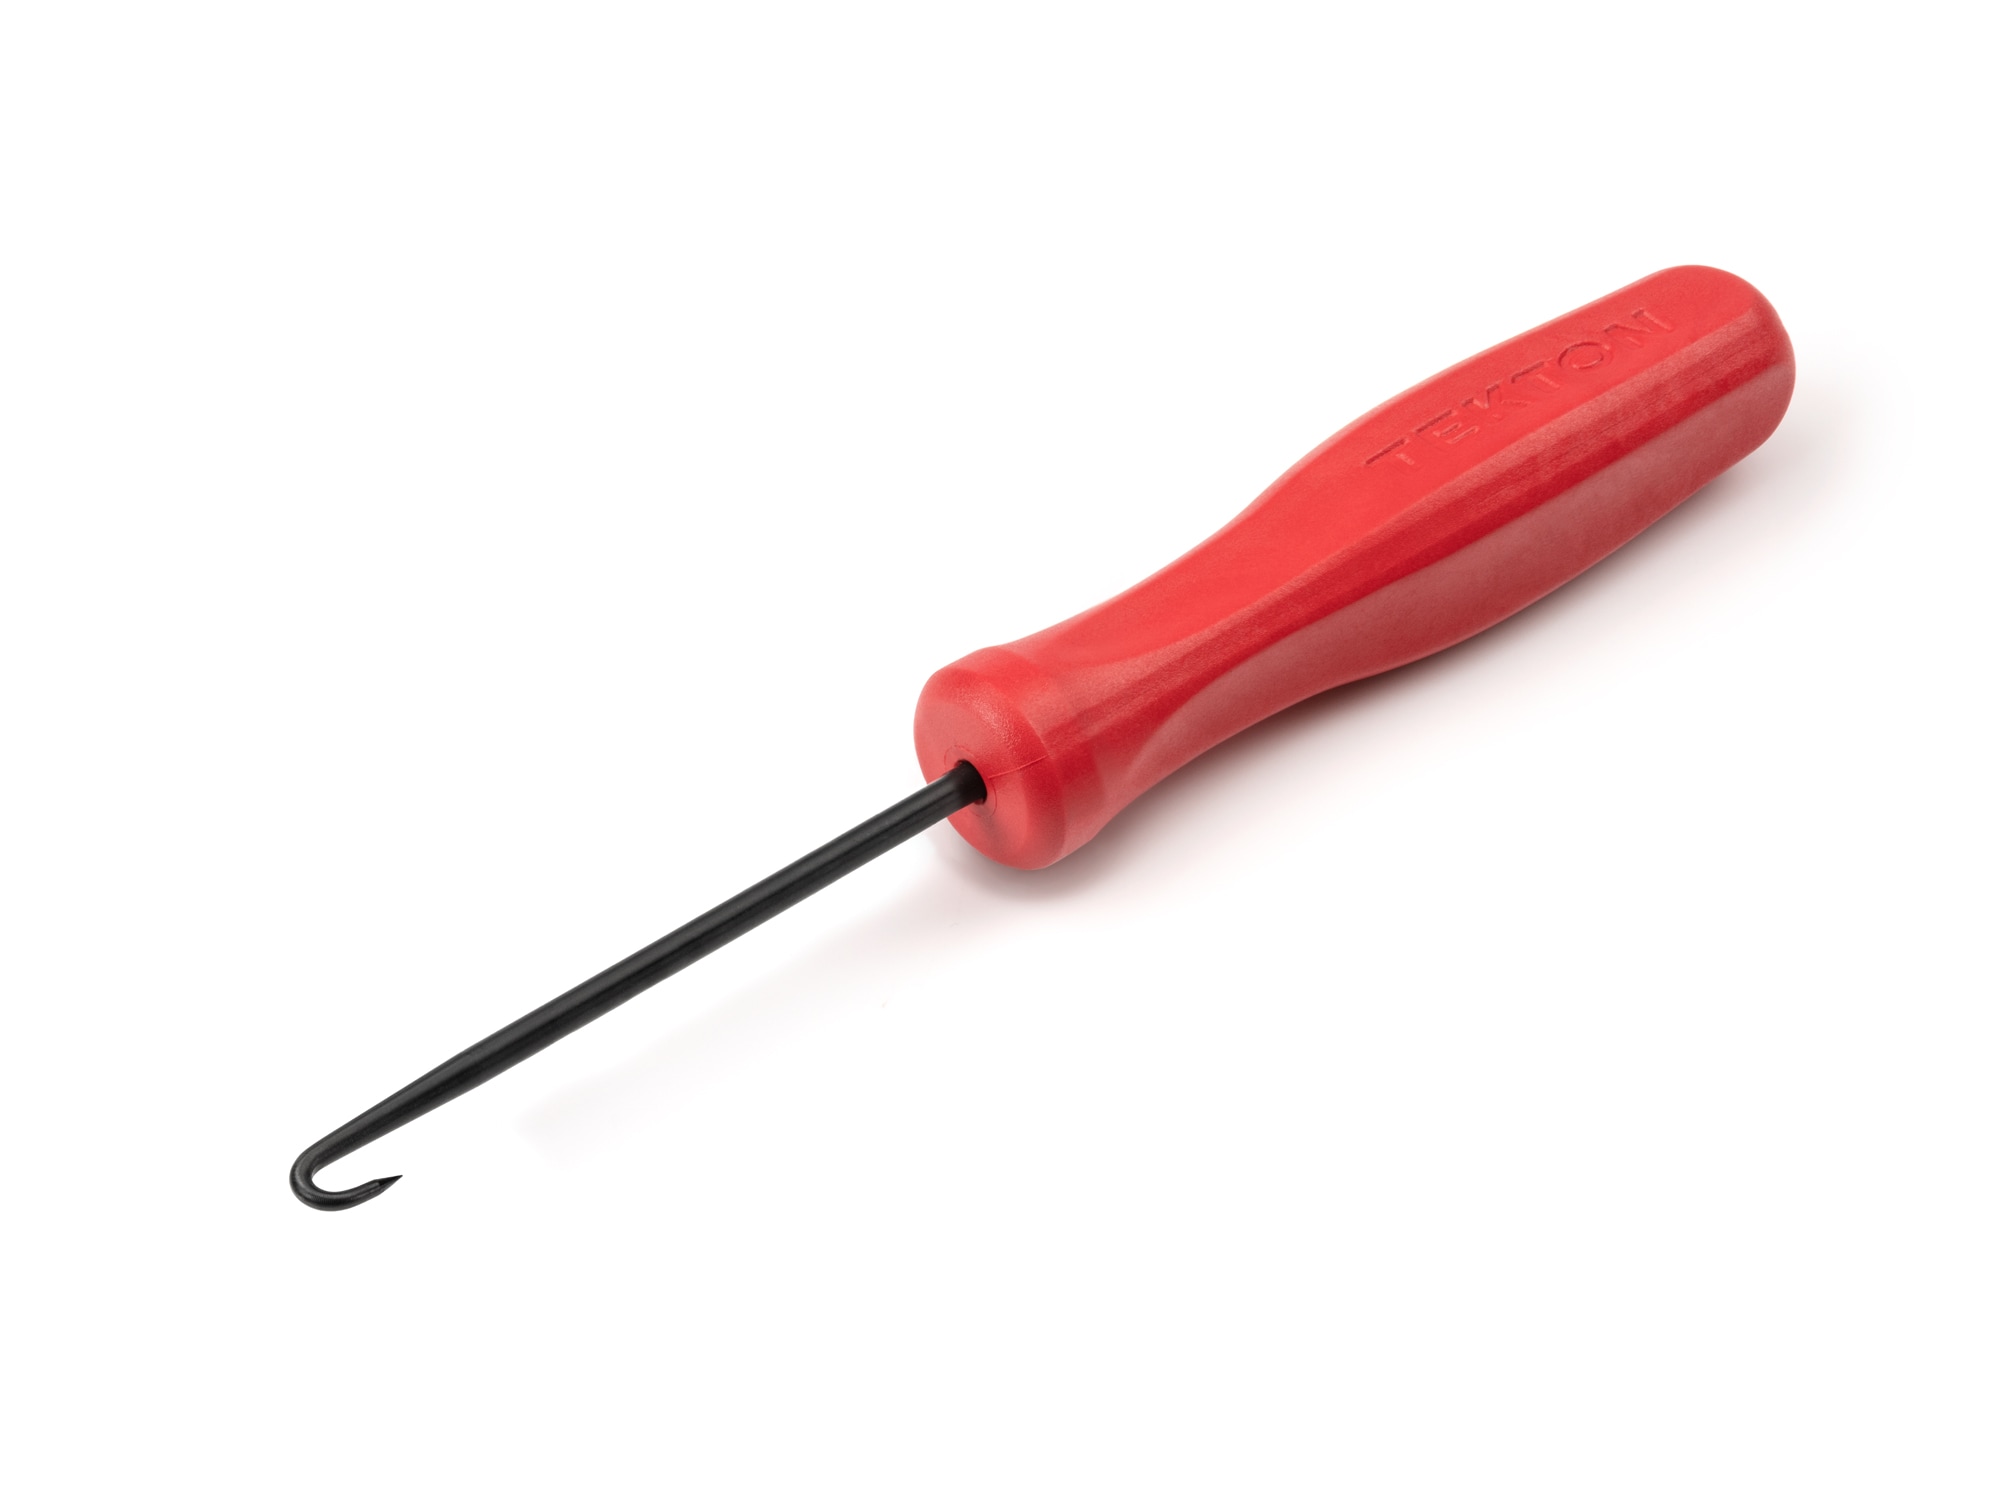 TEKTON Automotive Mini Hook in the Automotive Hand Tools department at